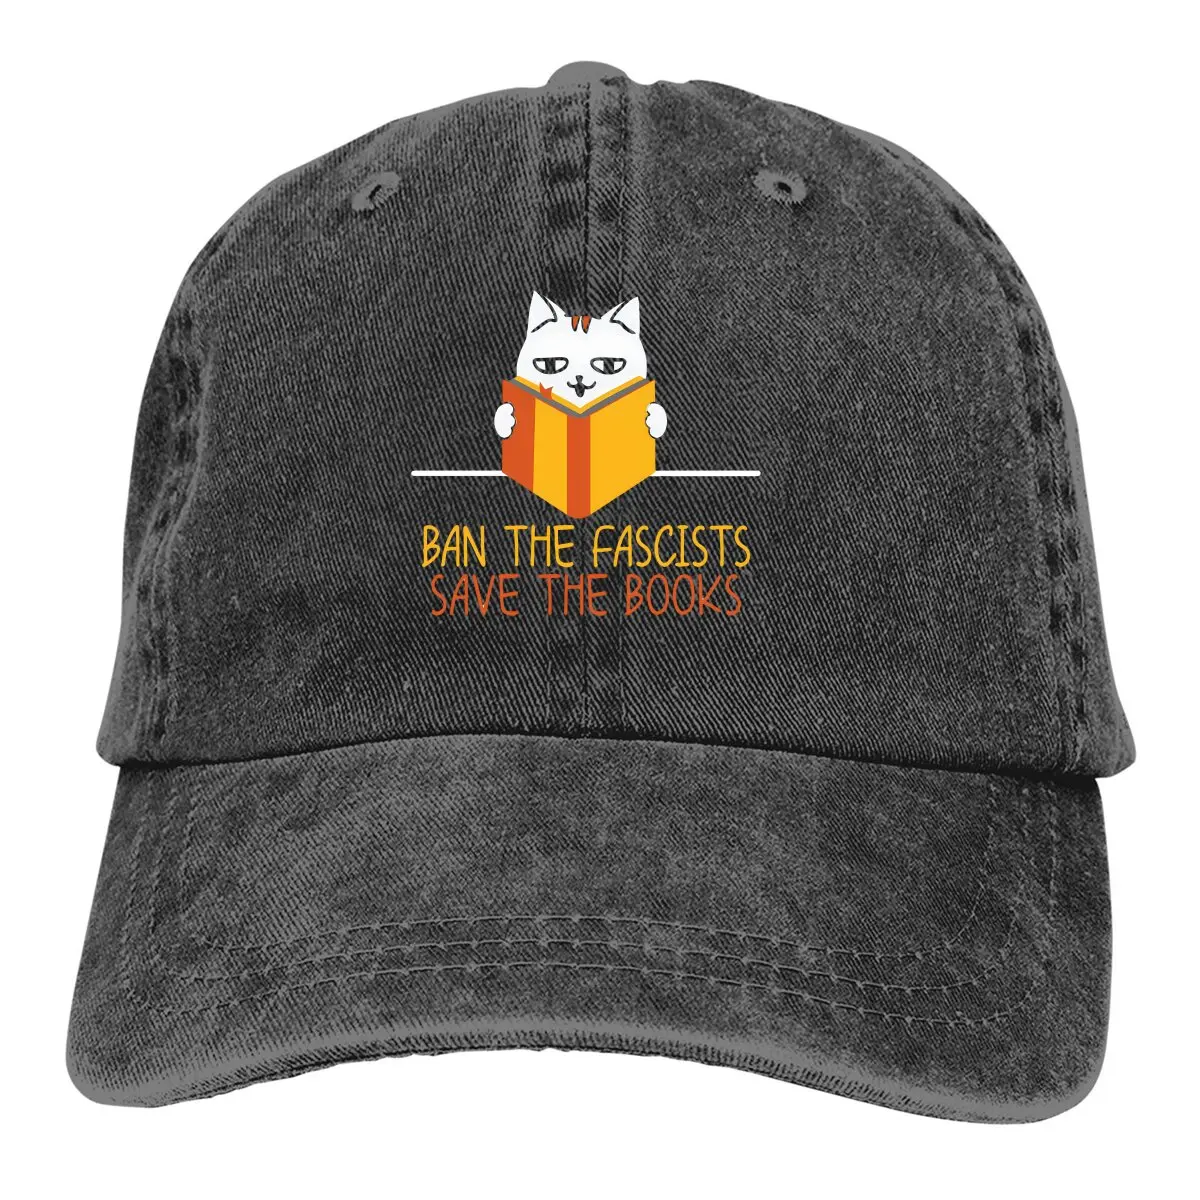 

Washed Men's Baseball Cap Ban The Fascists Save The Books Trucker Snapback Caps Dad Hat Cartoon Animation About Books Golf Hats